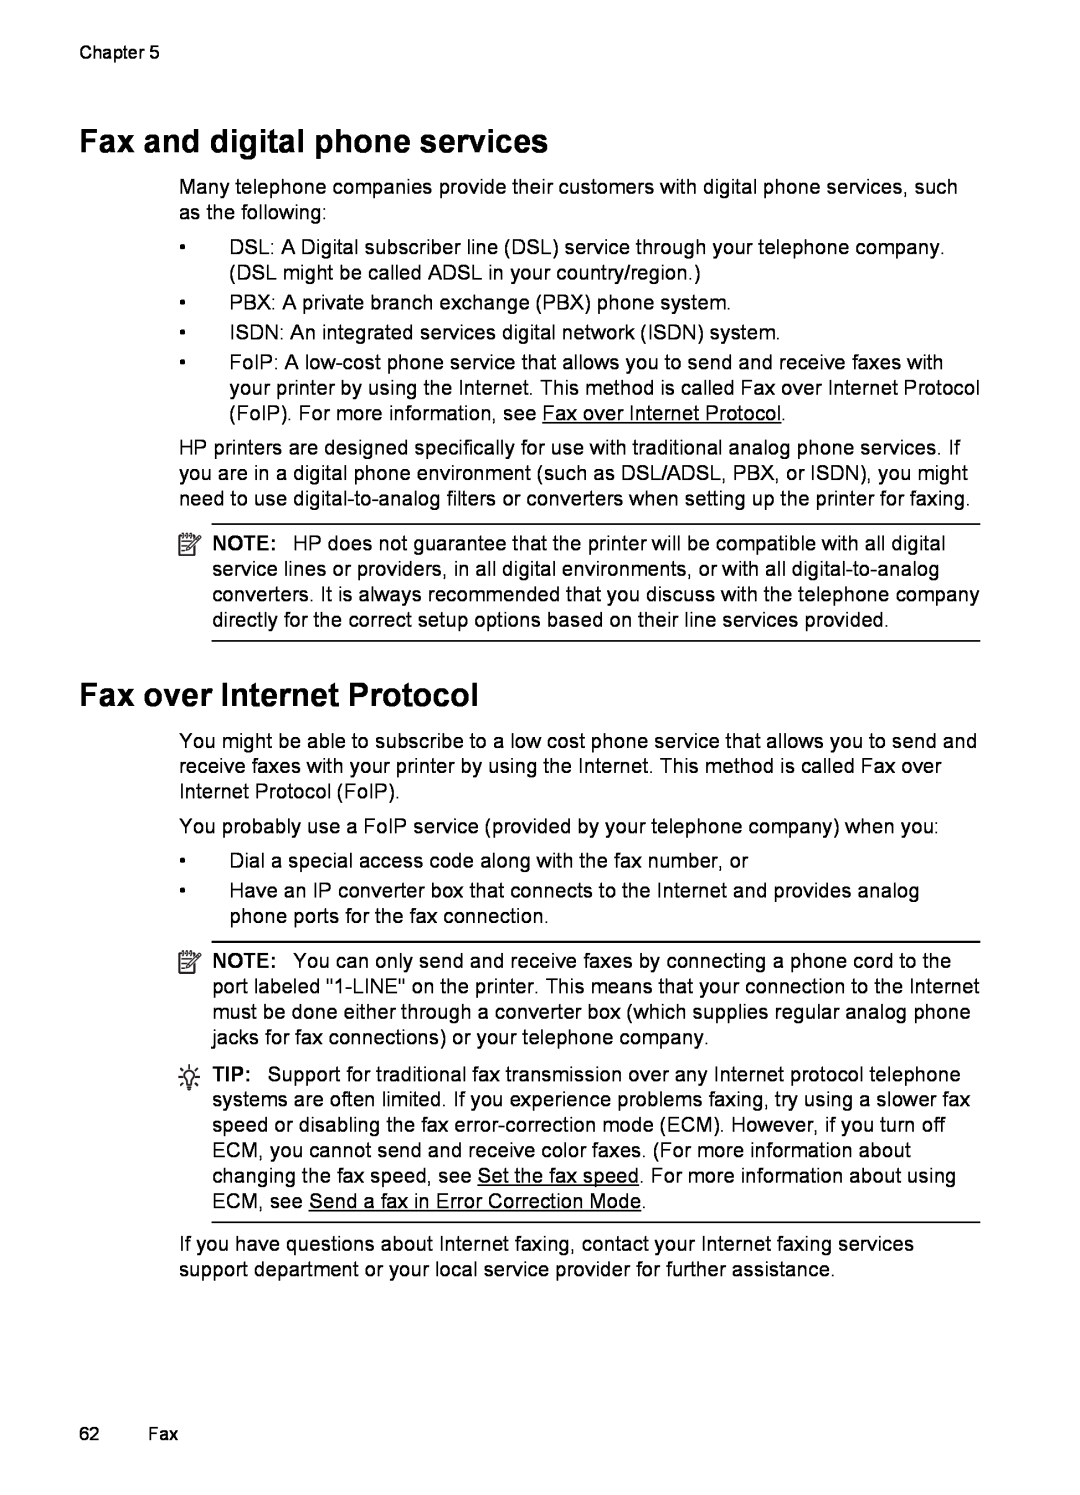 HP 6600 - H7 manual Fax and digital phone services, Fax over Internet Protocol 